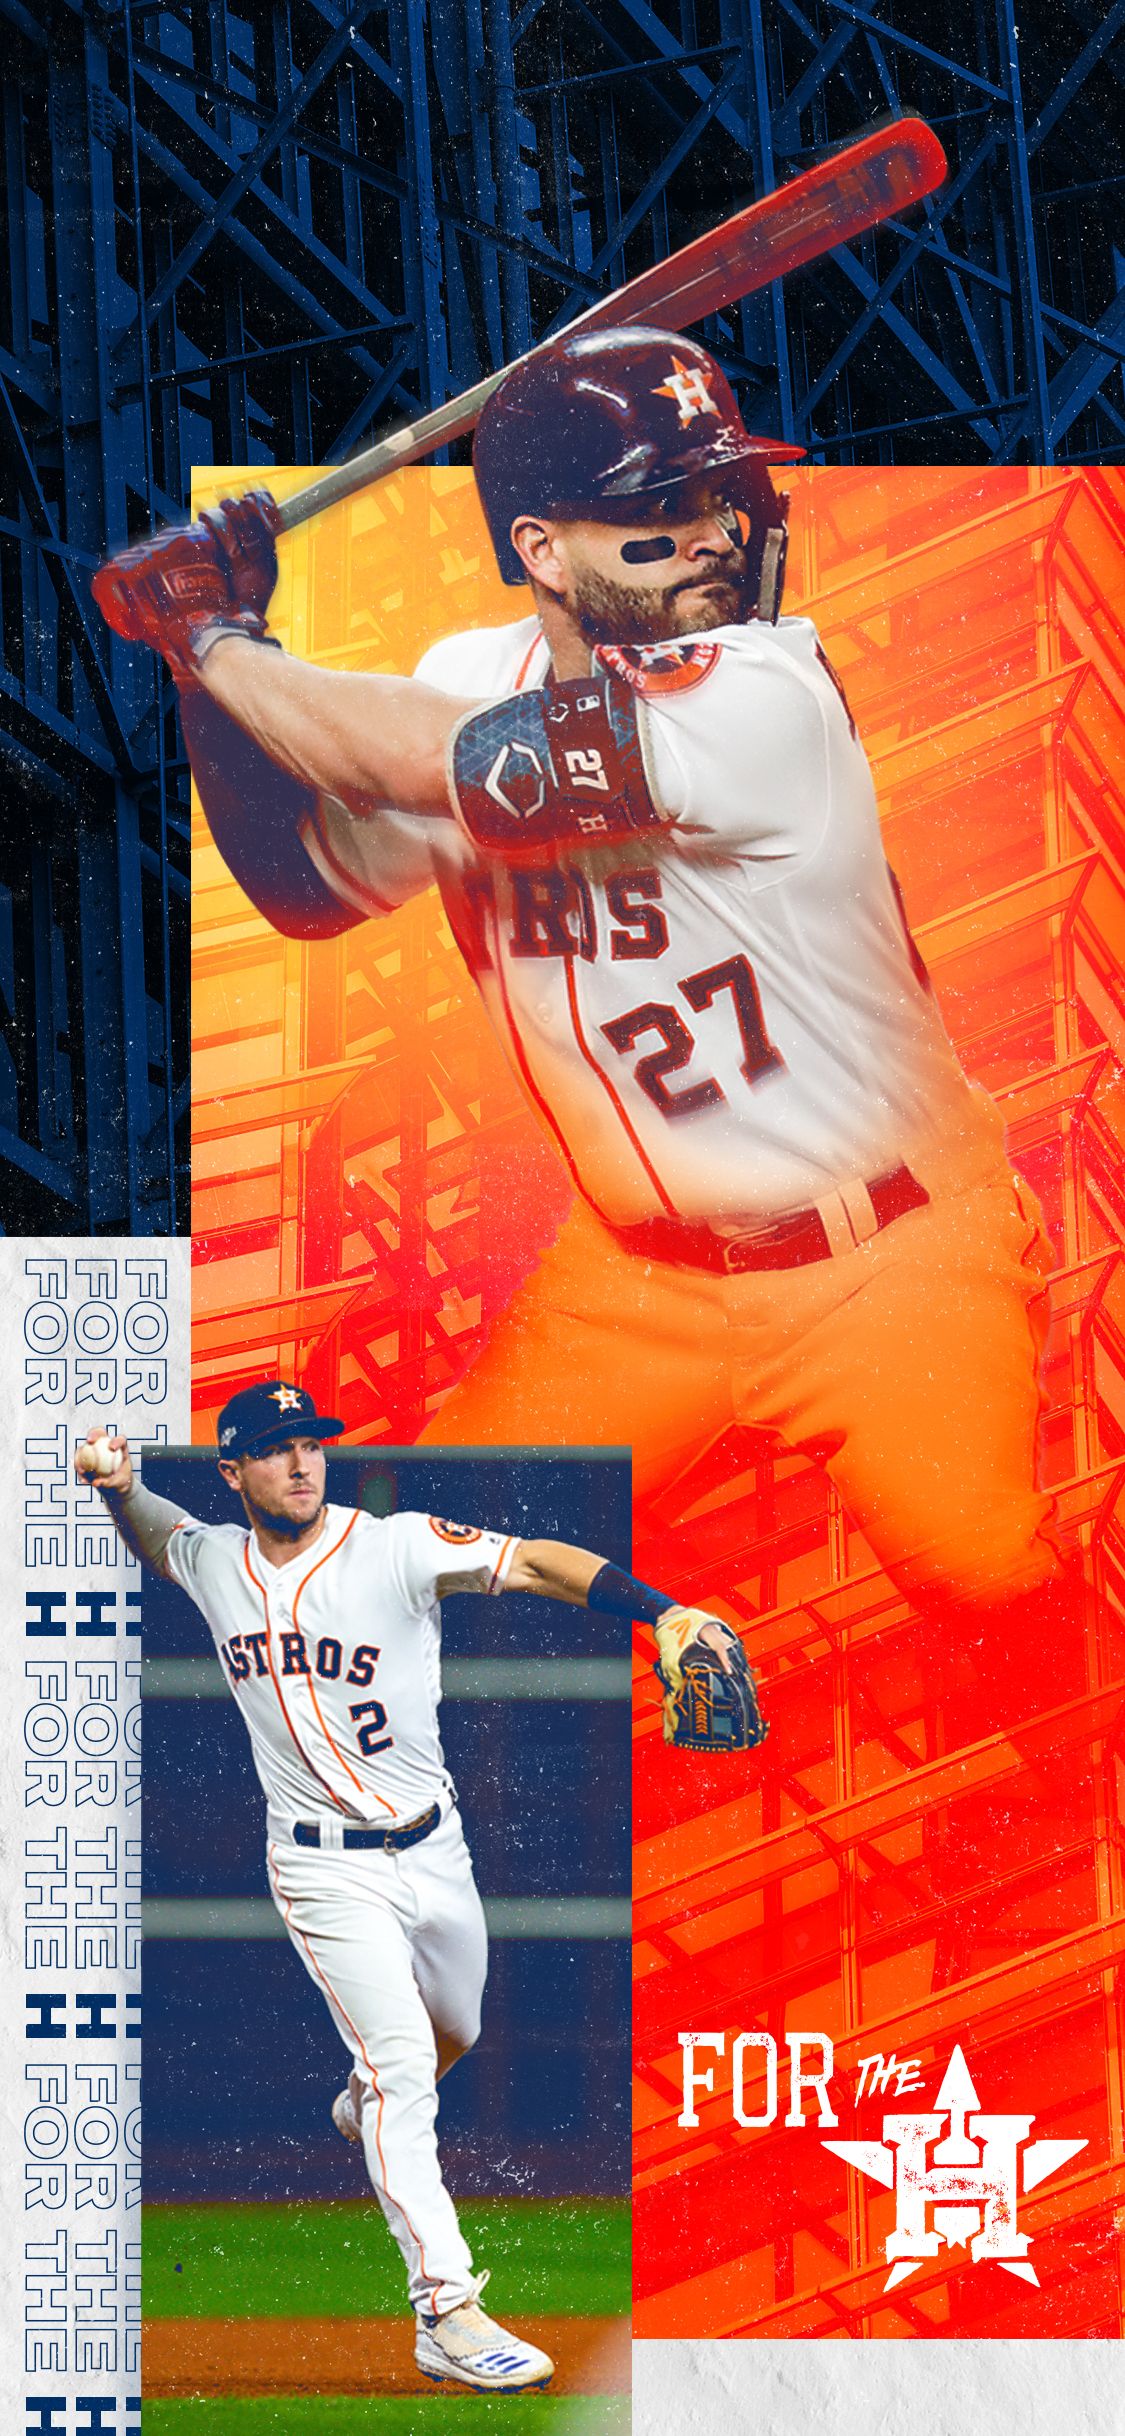 Houston Astros wallpaper by Chrisjm3  Download on ZEDGE  a4f1